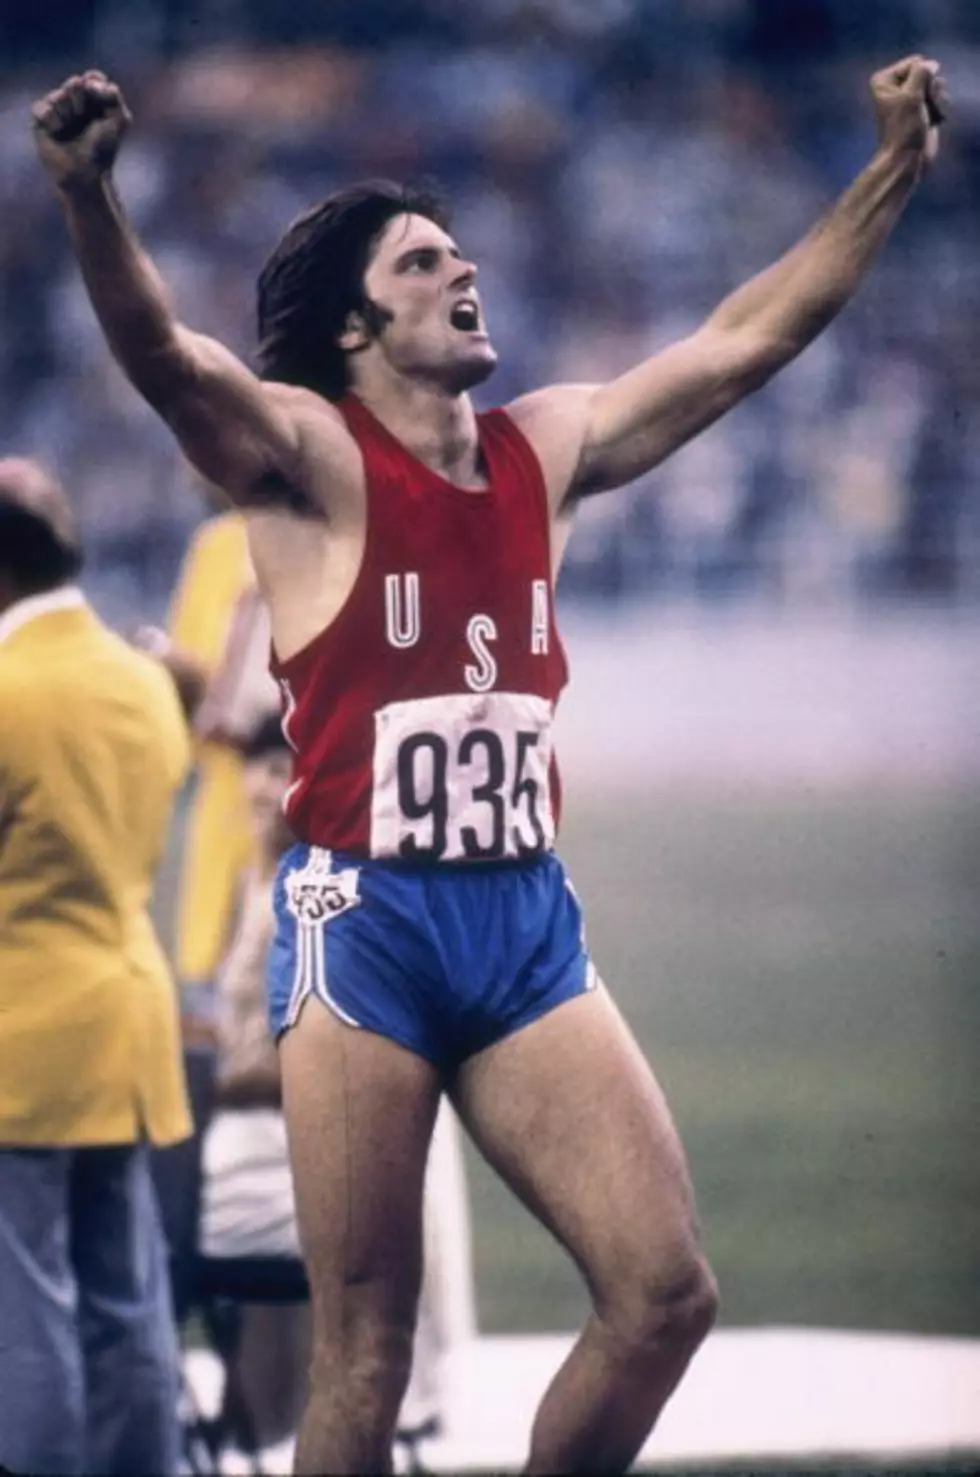 Who Is Bruce Jenner? (Video)